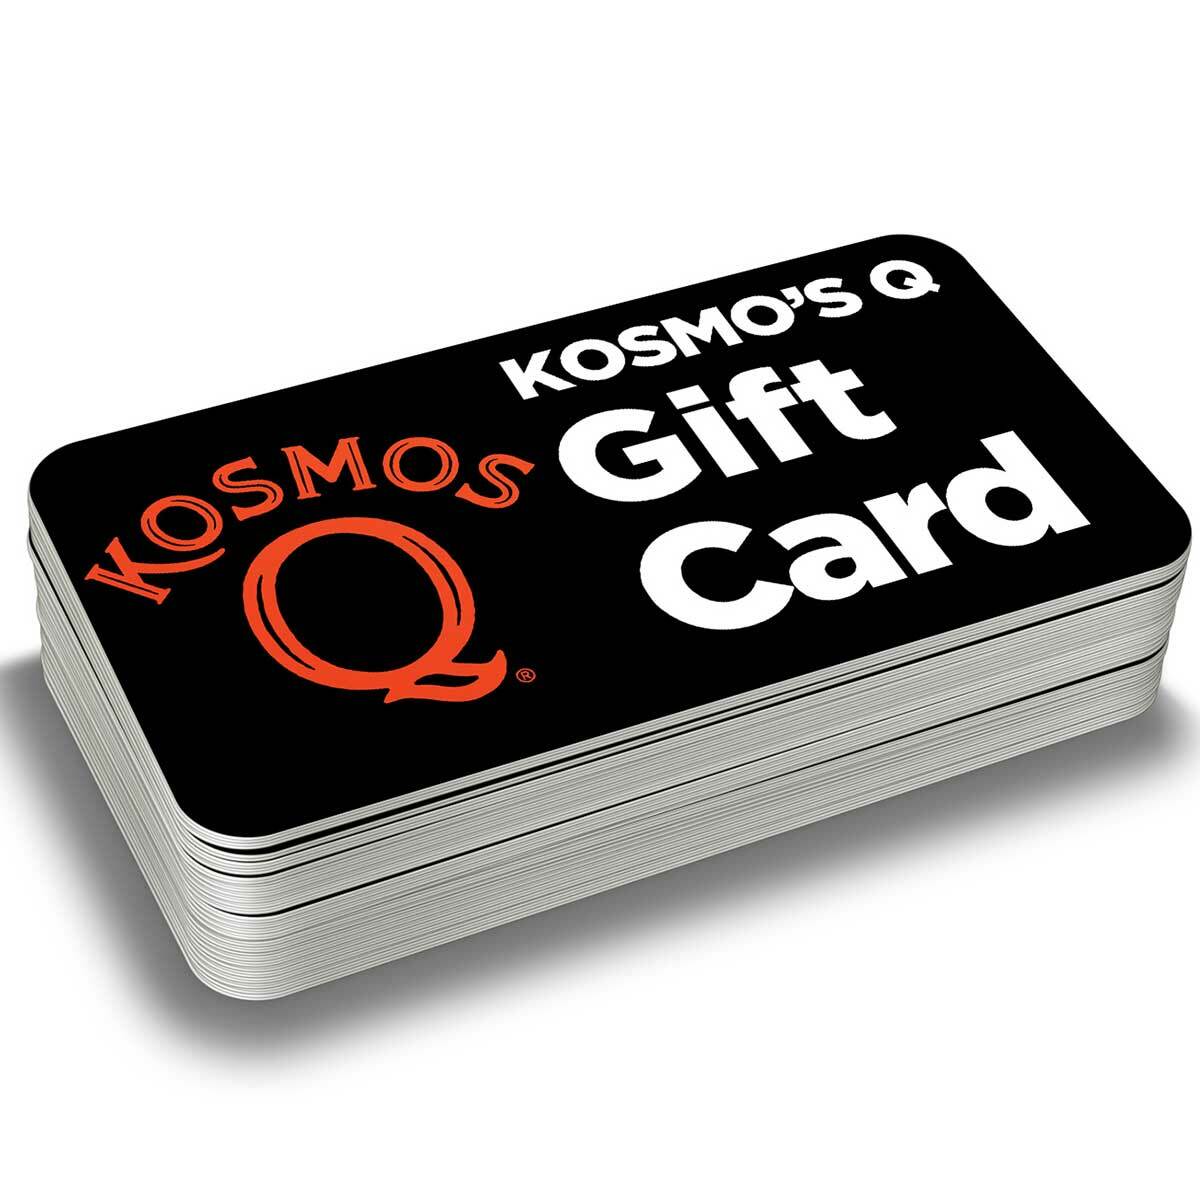 Kosmo's Q Gift Certificates Gift Card